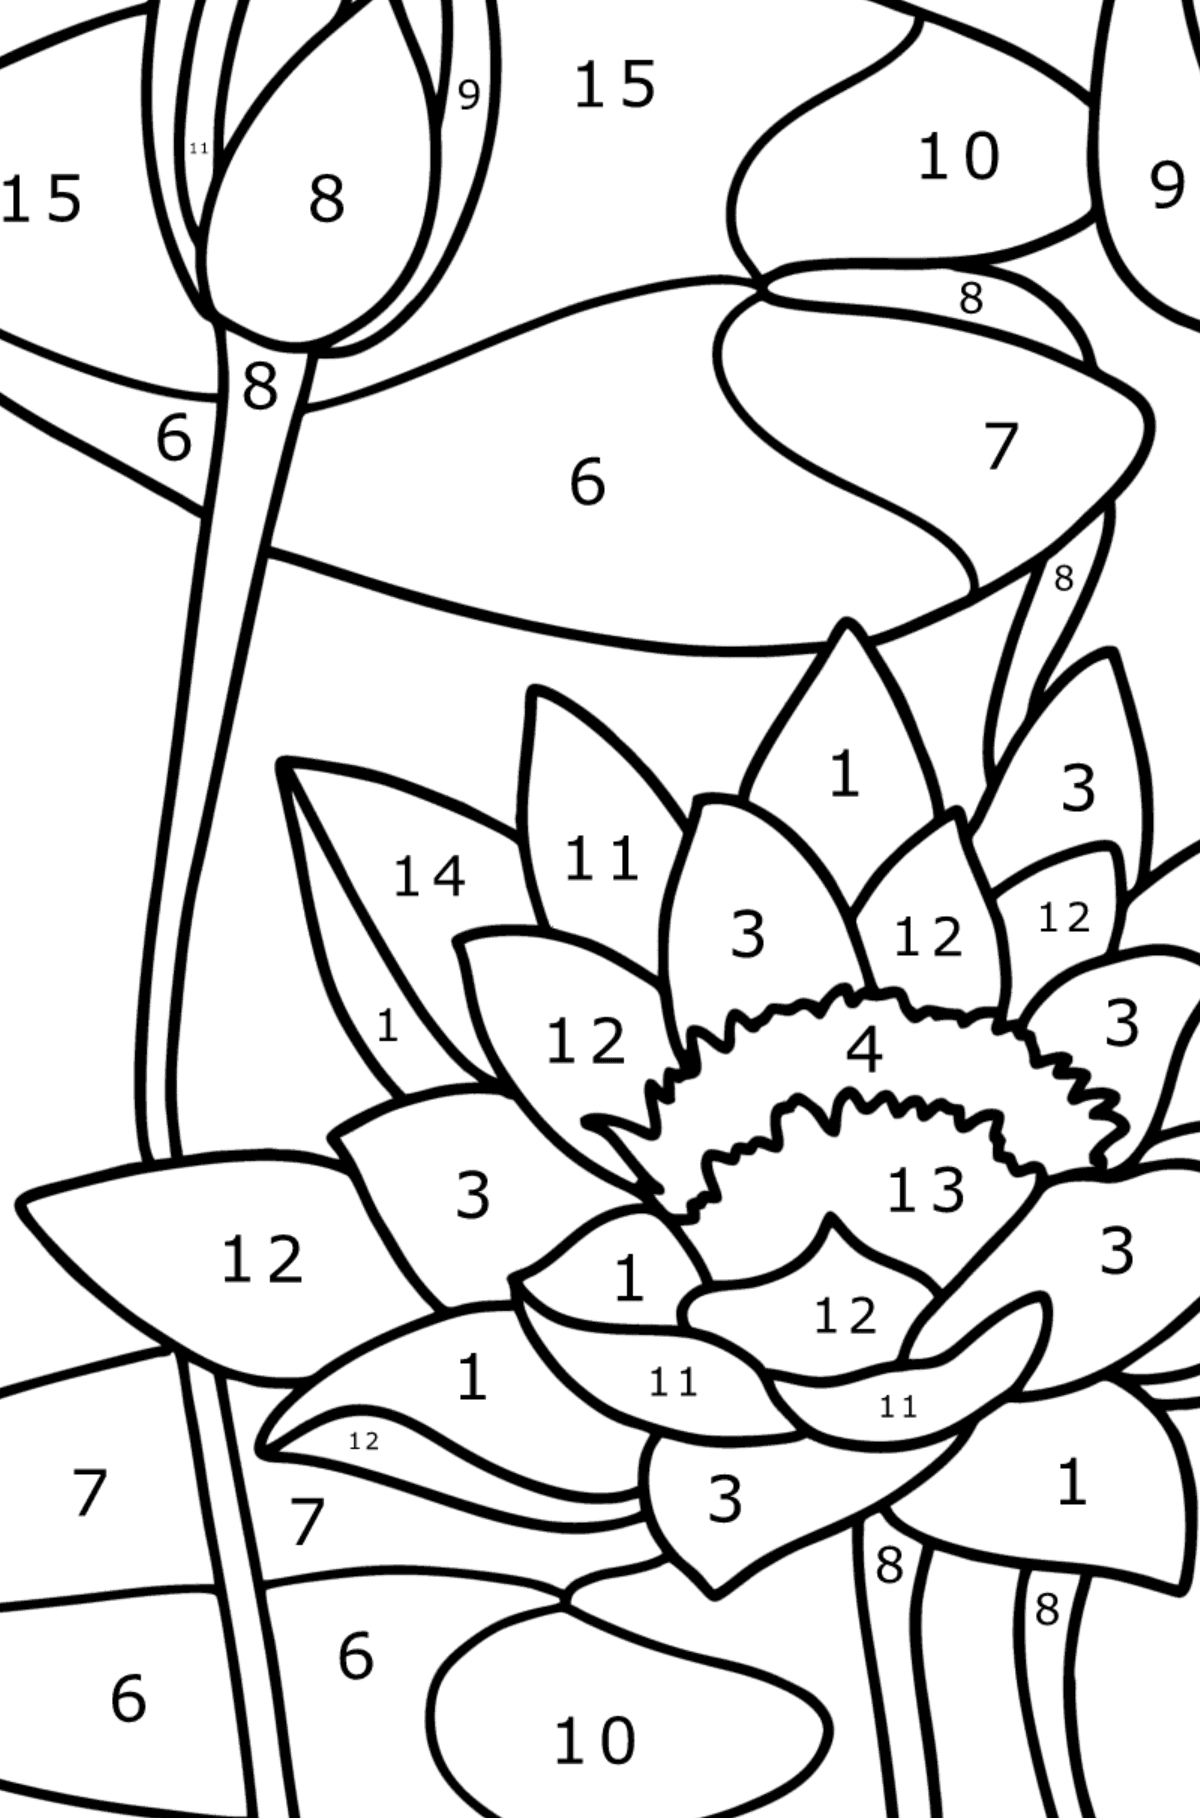 Water lily coloring page - Coloring by Numbers for Kids